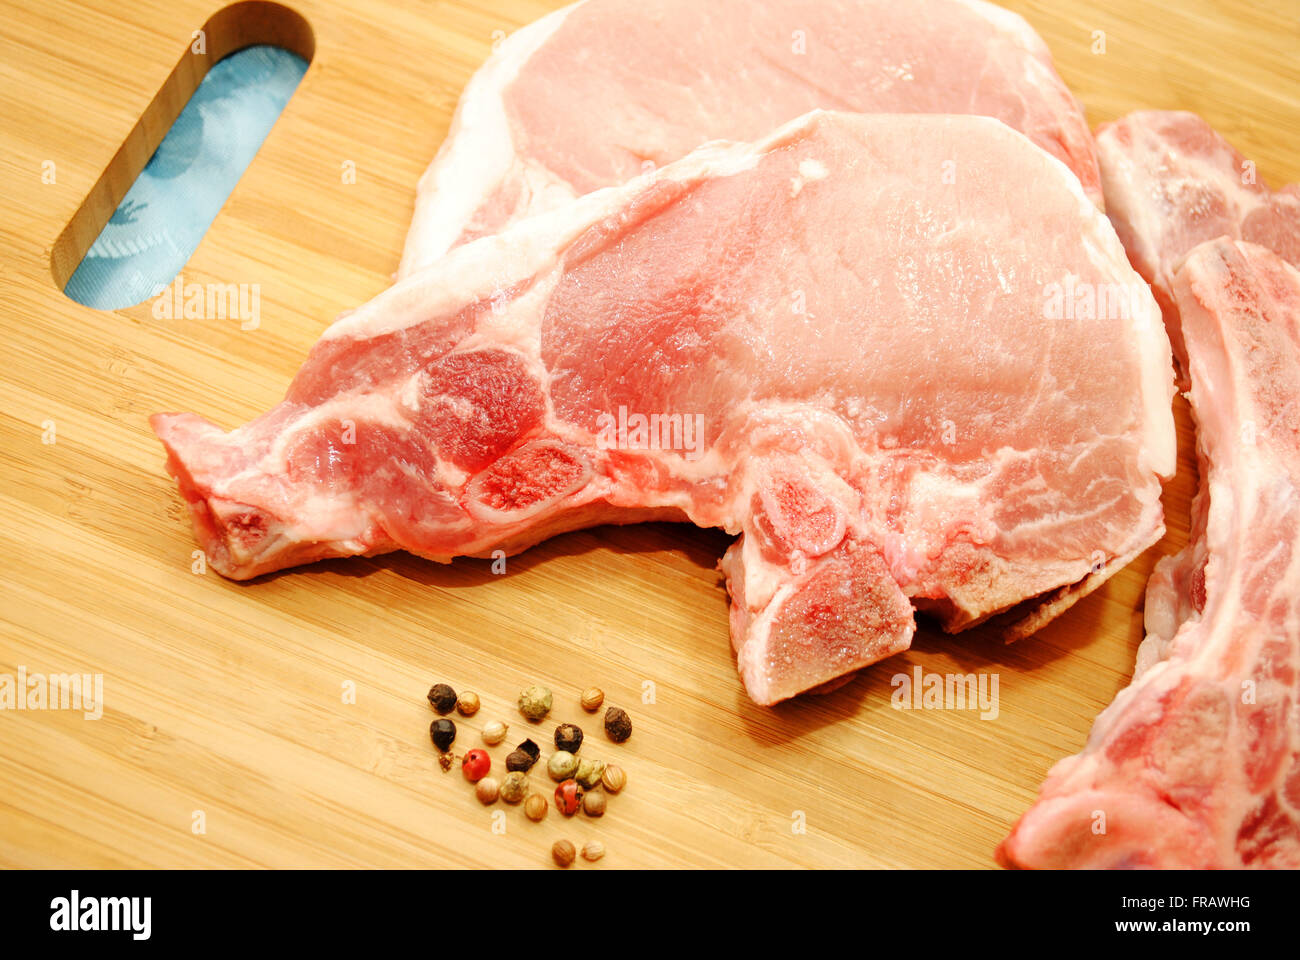 Pork Chops with Whole Peppercorns on a Wooden Cutting Board Stock Photo